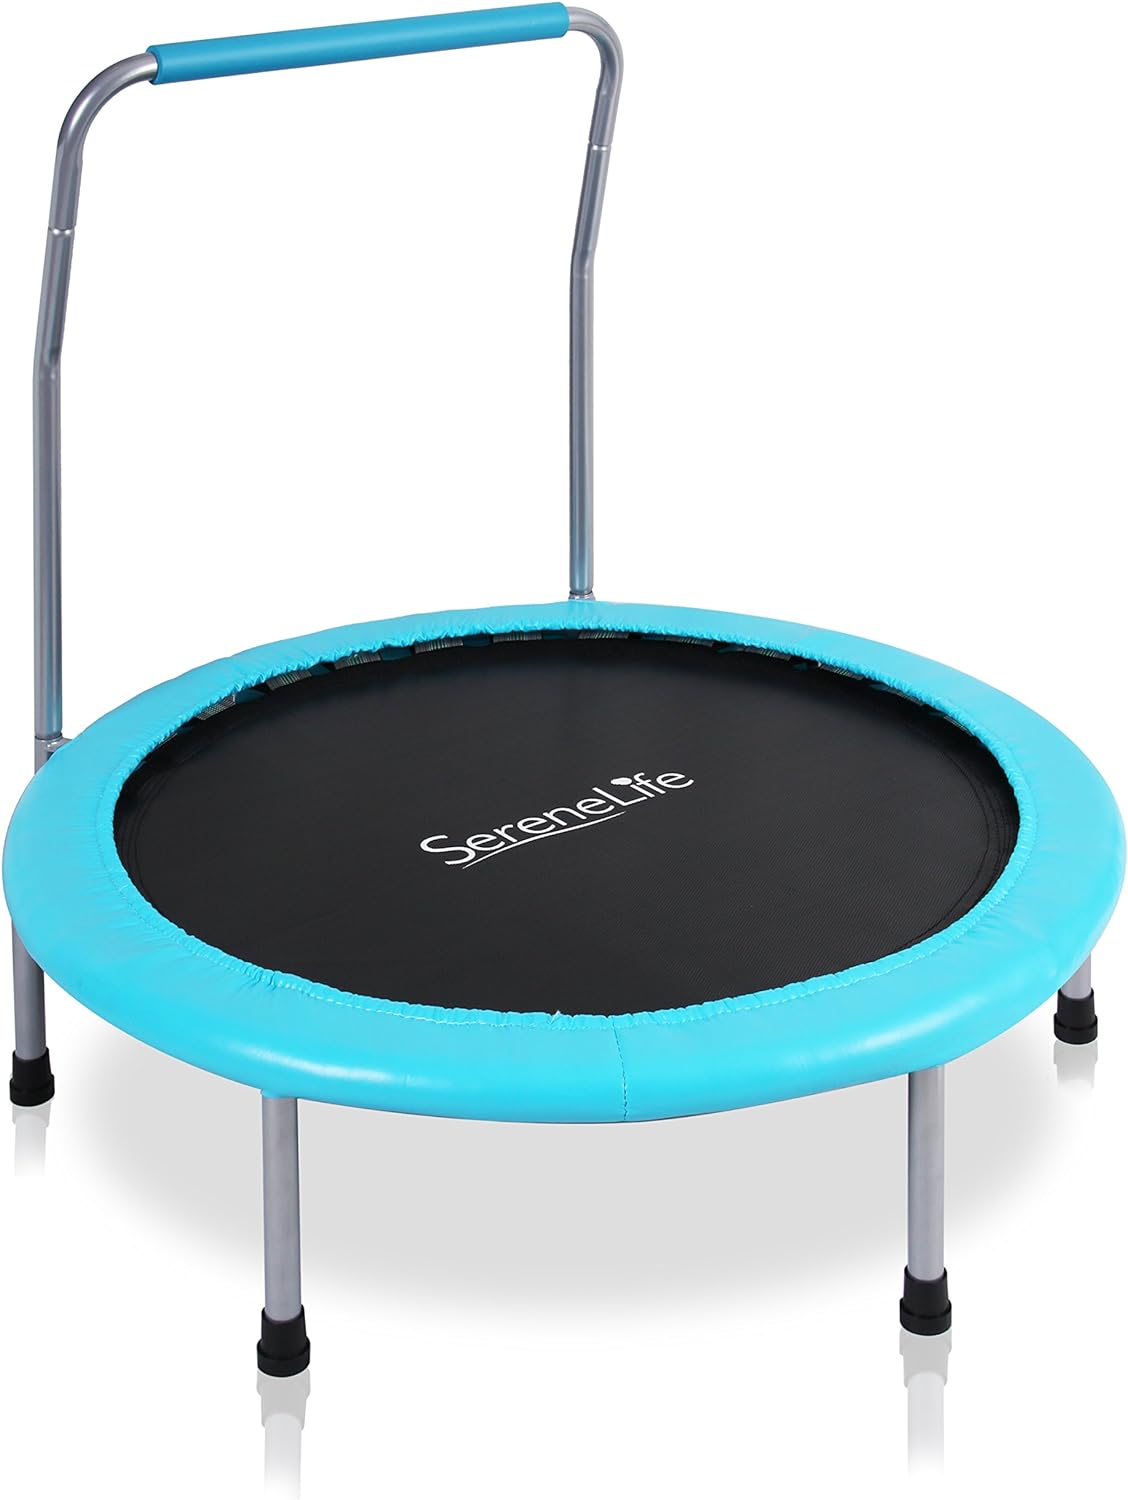 SereneLife 36 Inch Portable Fitness Trampoline – Sports Trampoline for Indoor and Outdoor Use – Professional Round Jumping Cardio Trampoline – Safe for Kid w/Padded Frame Cover and Handlebar